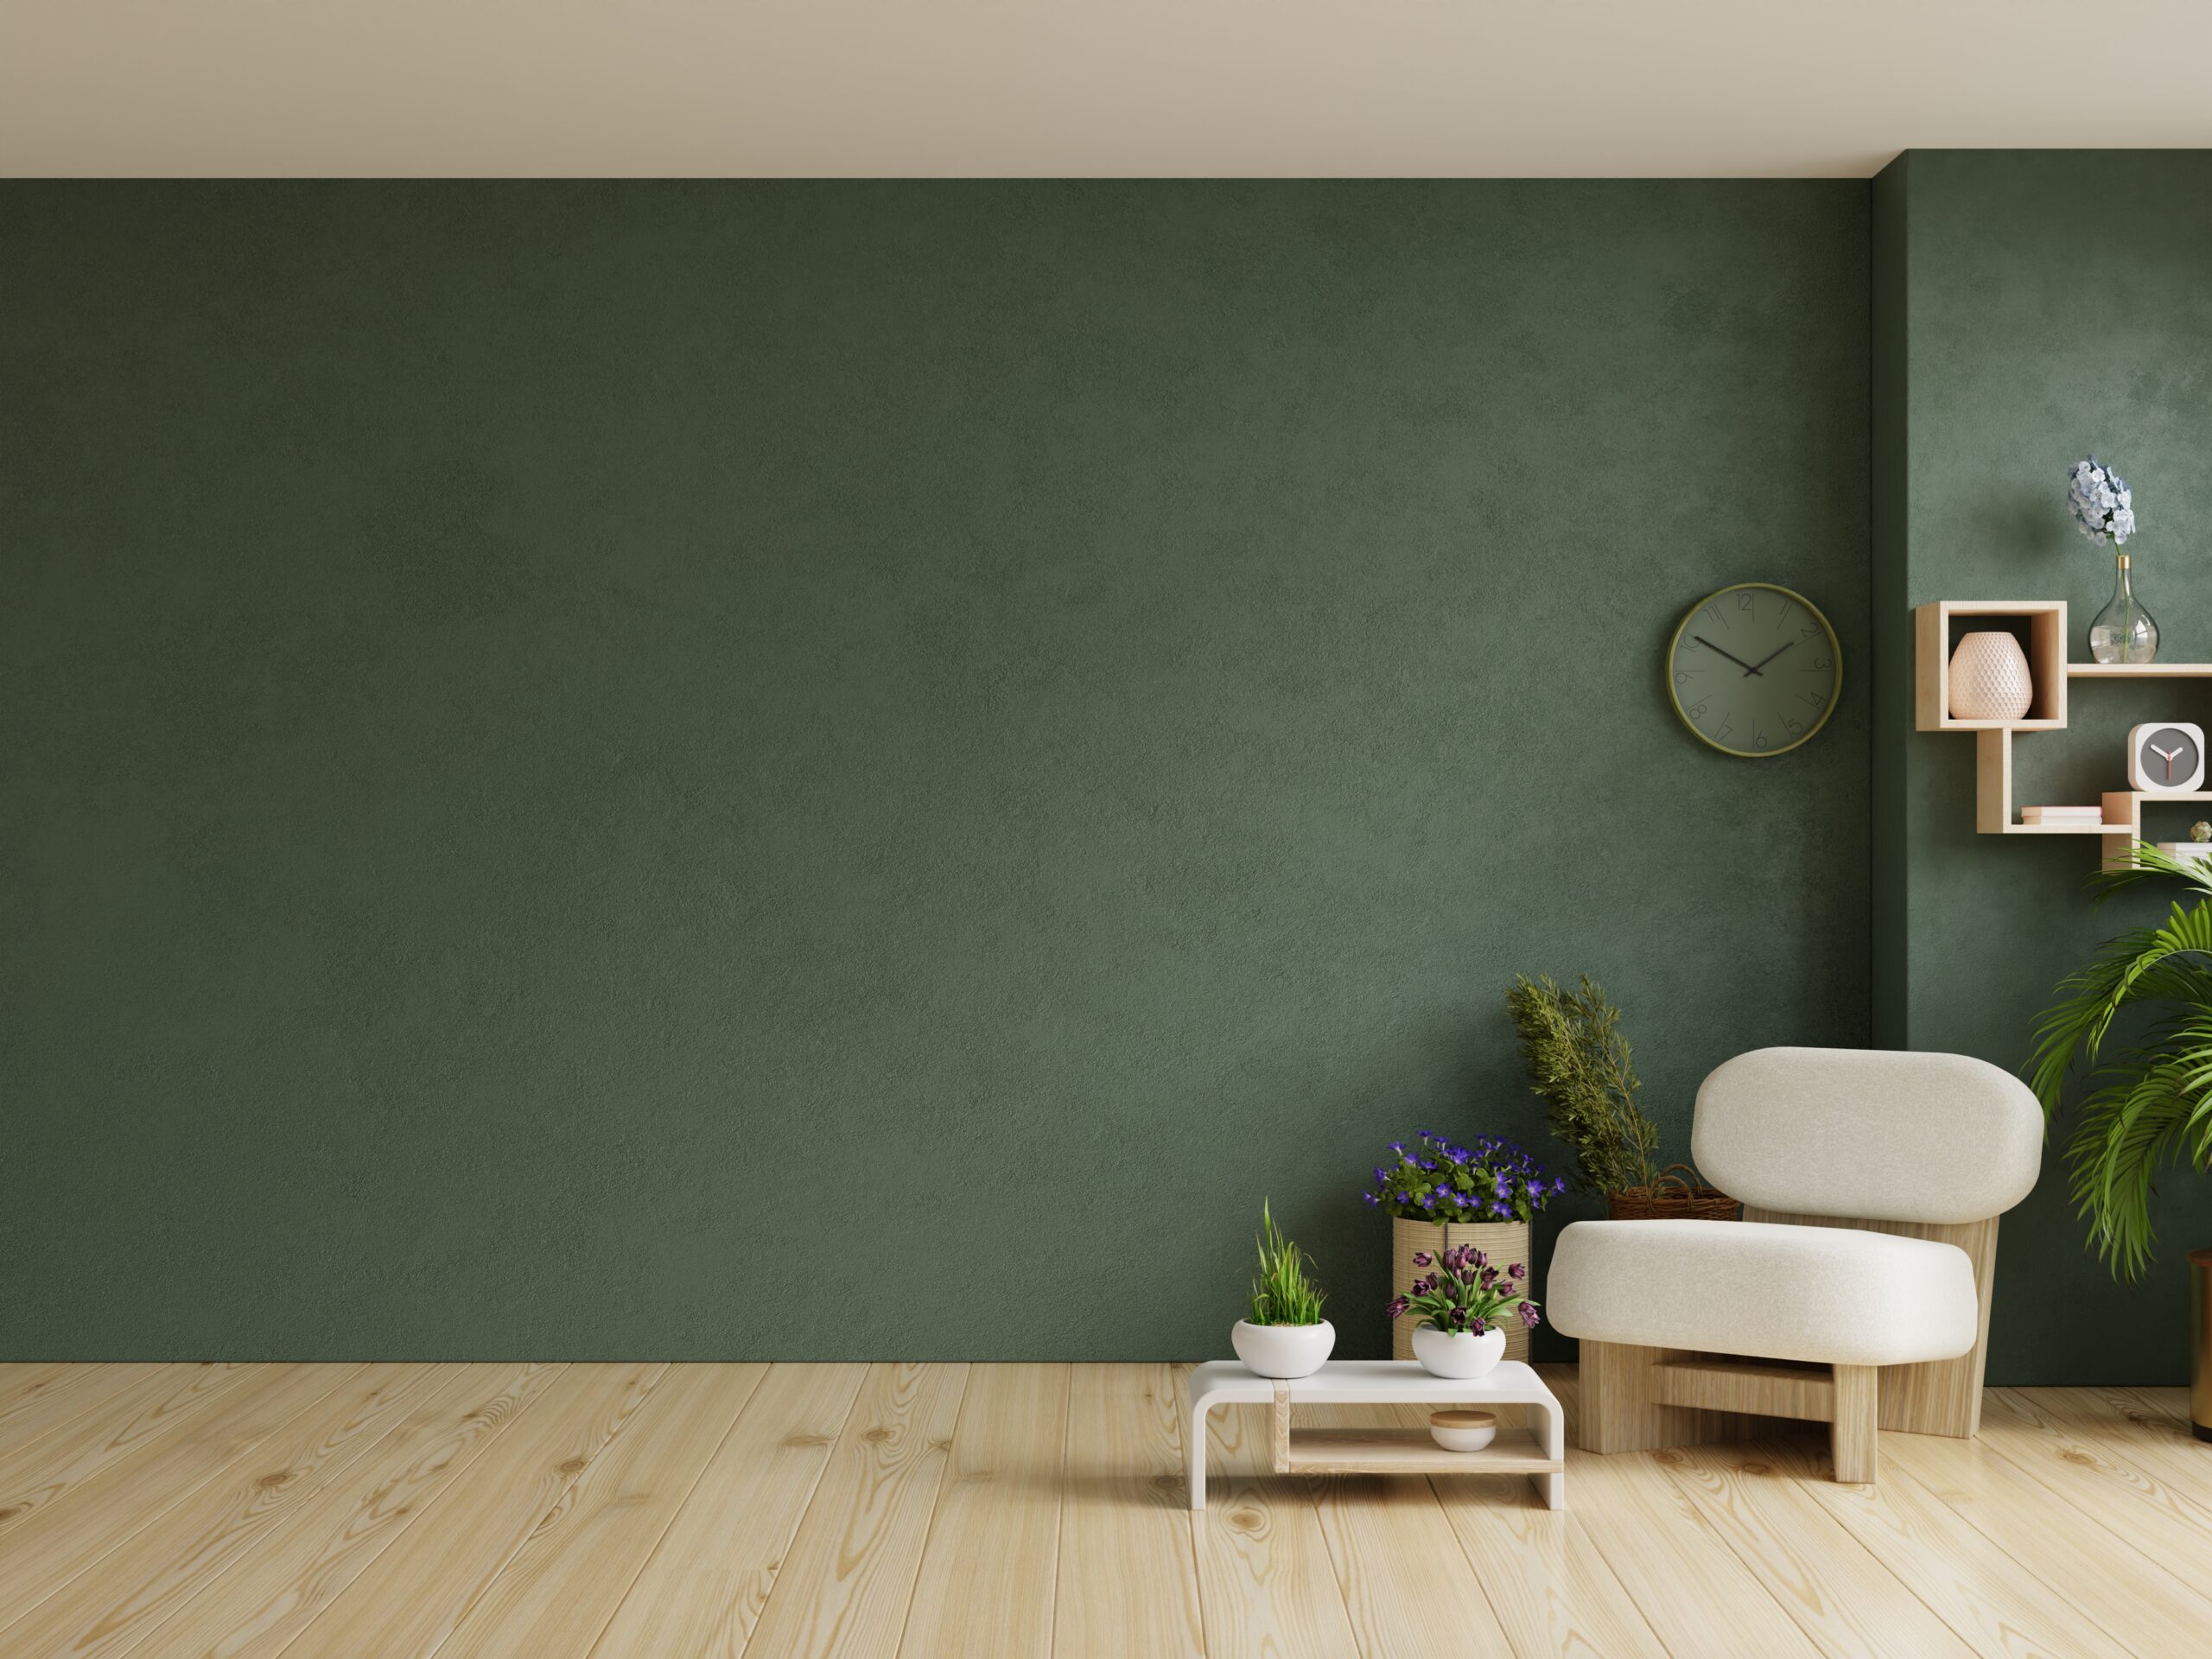 Style loft interior with gray armchair on empty dark green wall background